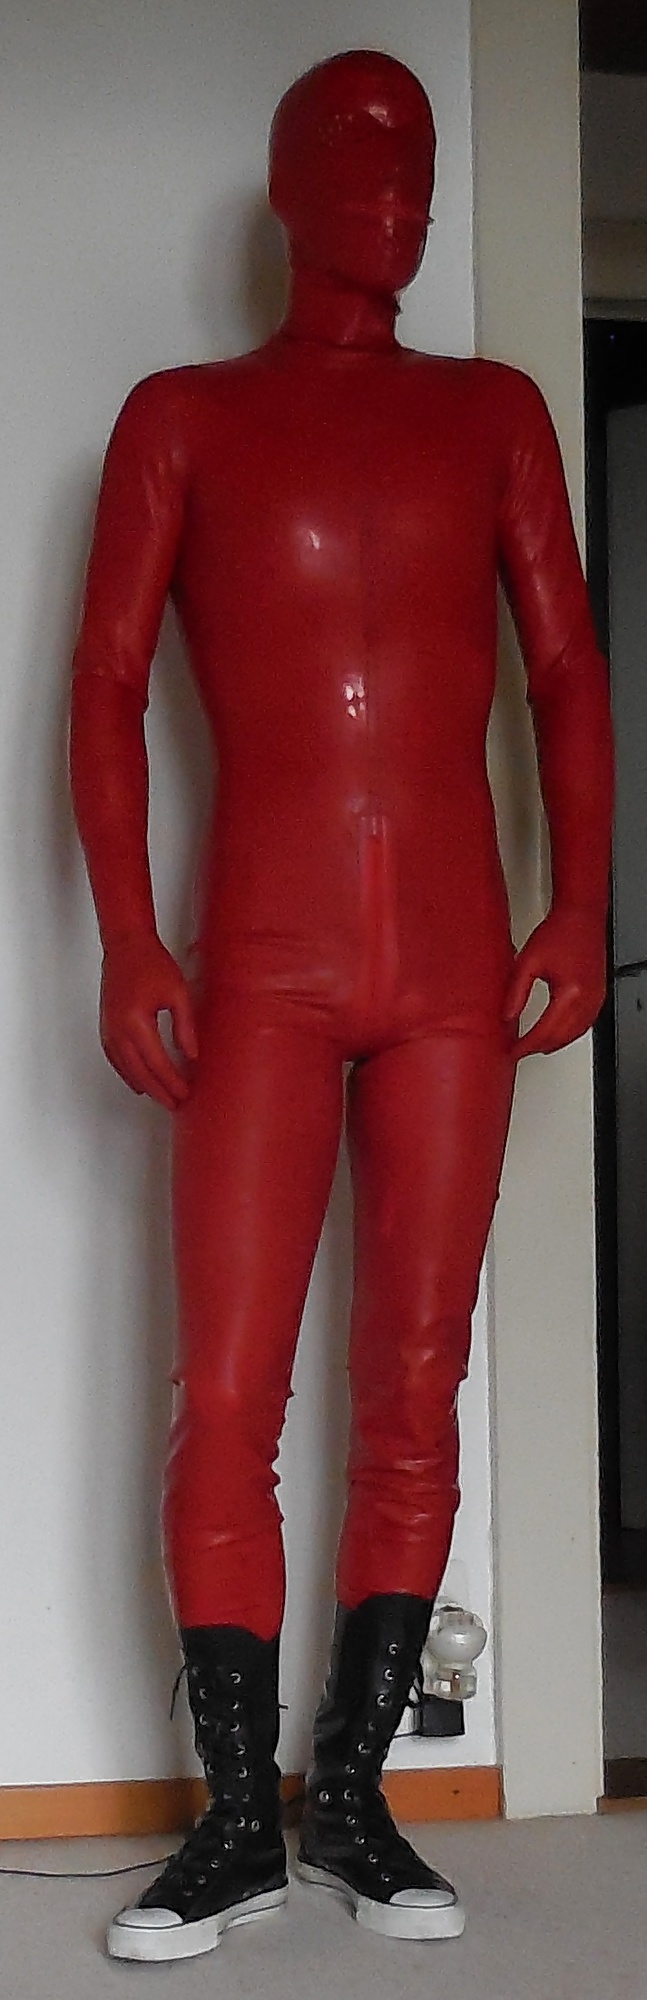 Latex catsuit and latex converse #30552421